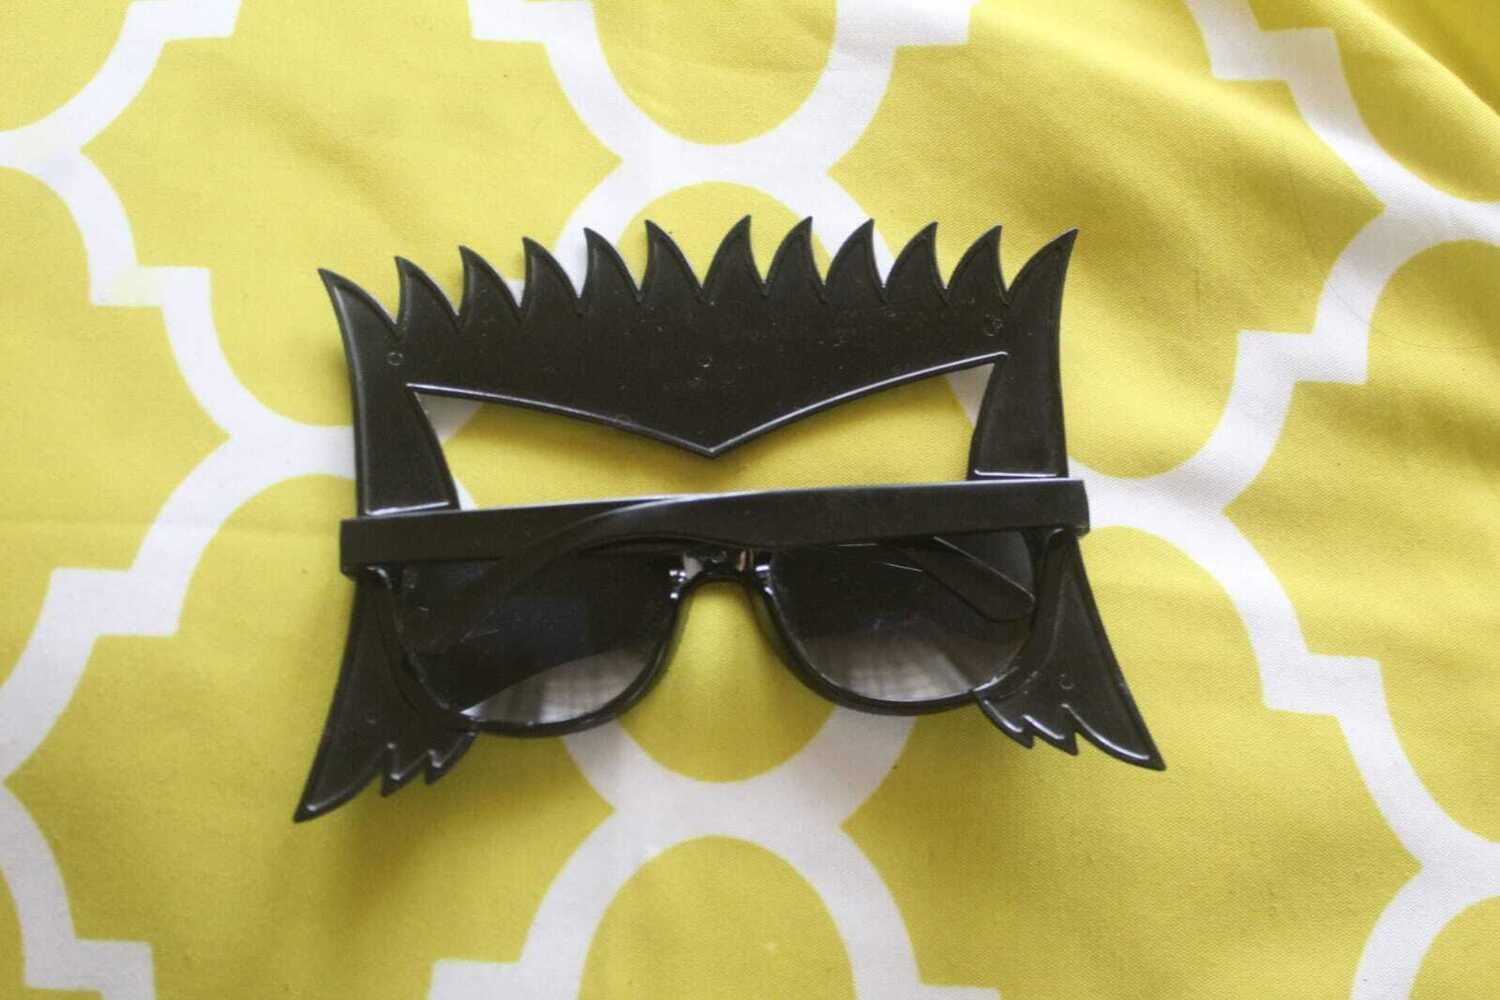 Wolverine Half Mask (Goggles Style)